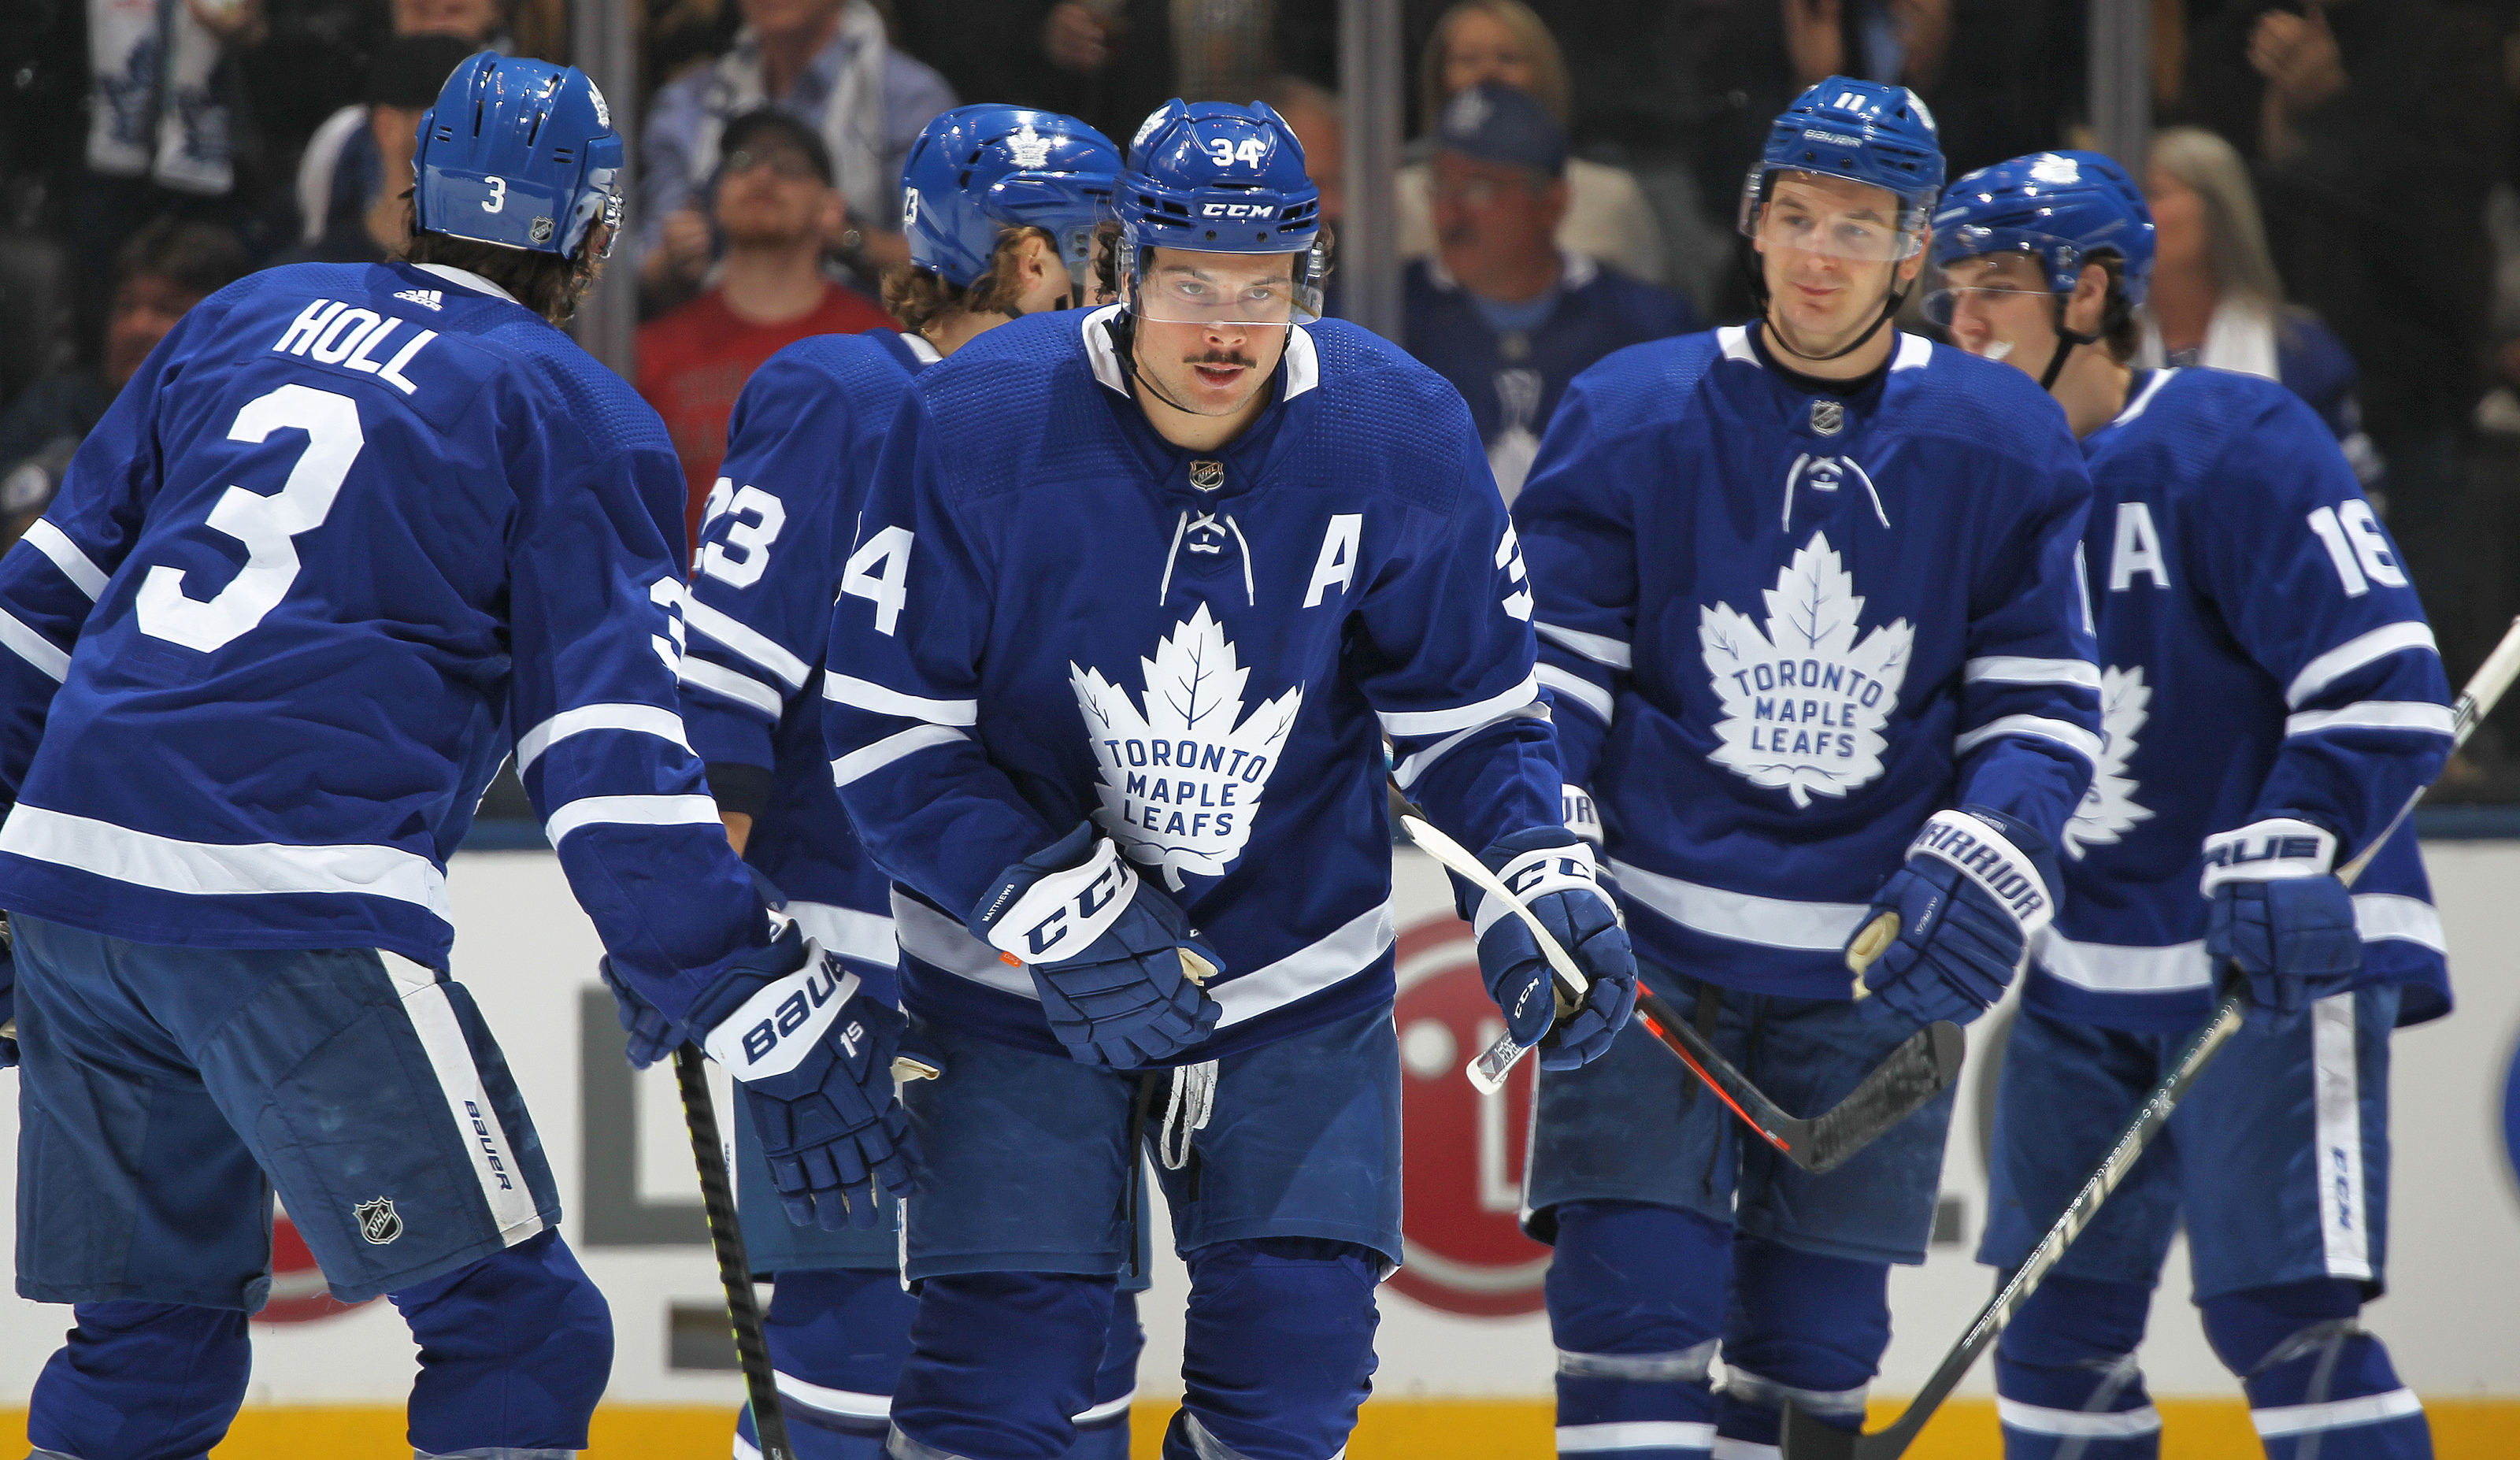 Around the NHL: Leafs can win their first playoff series since